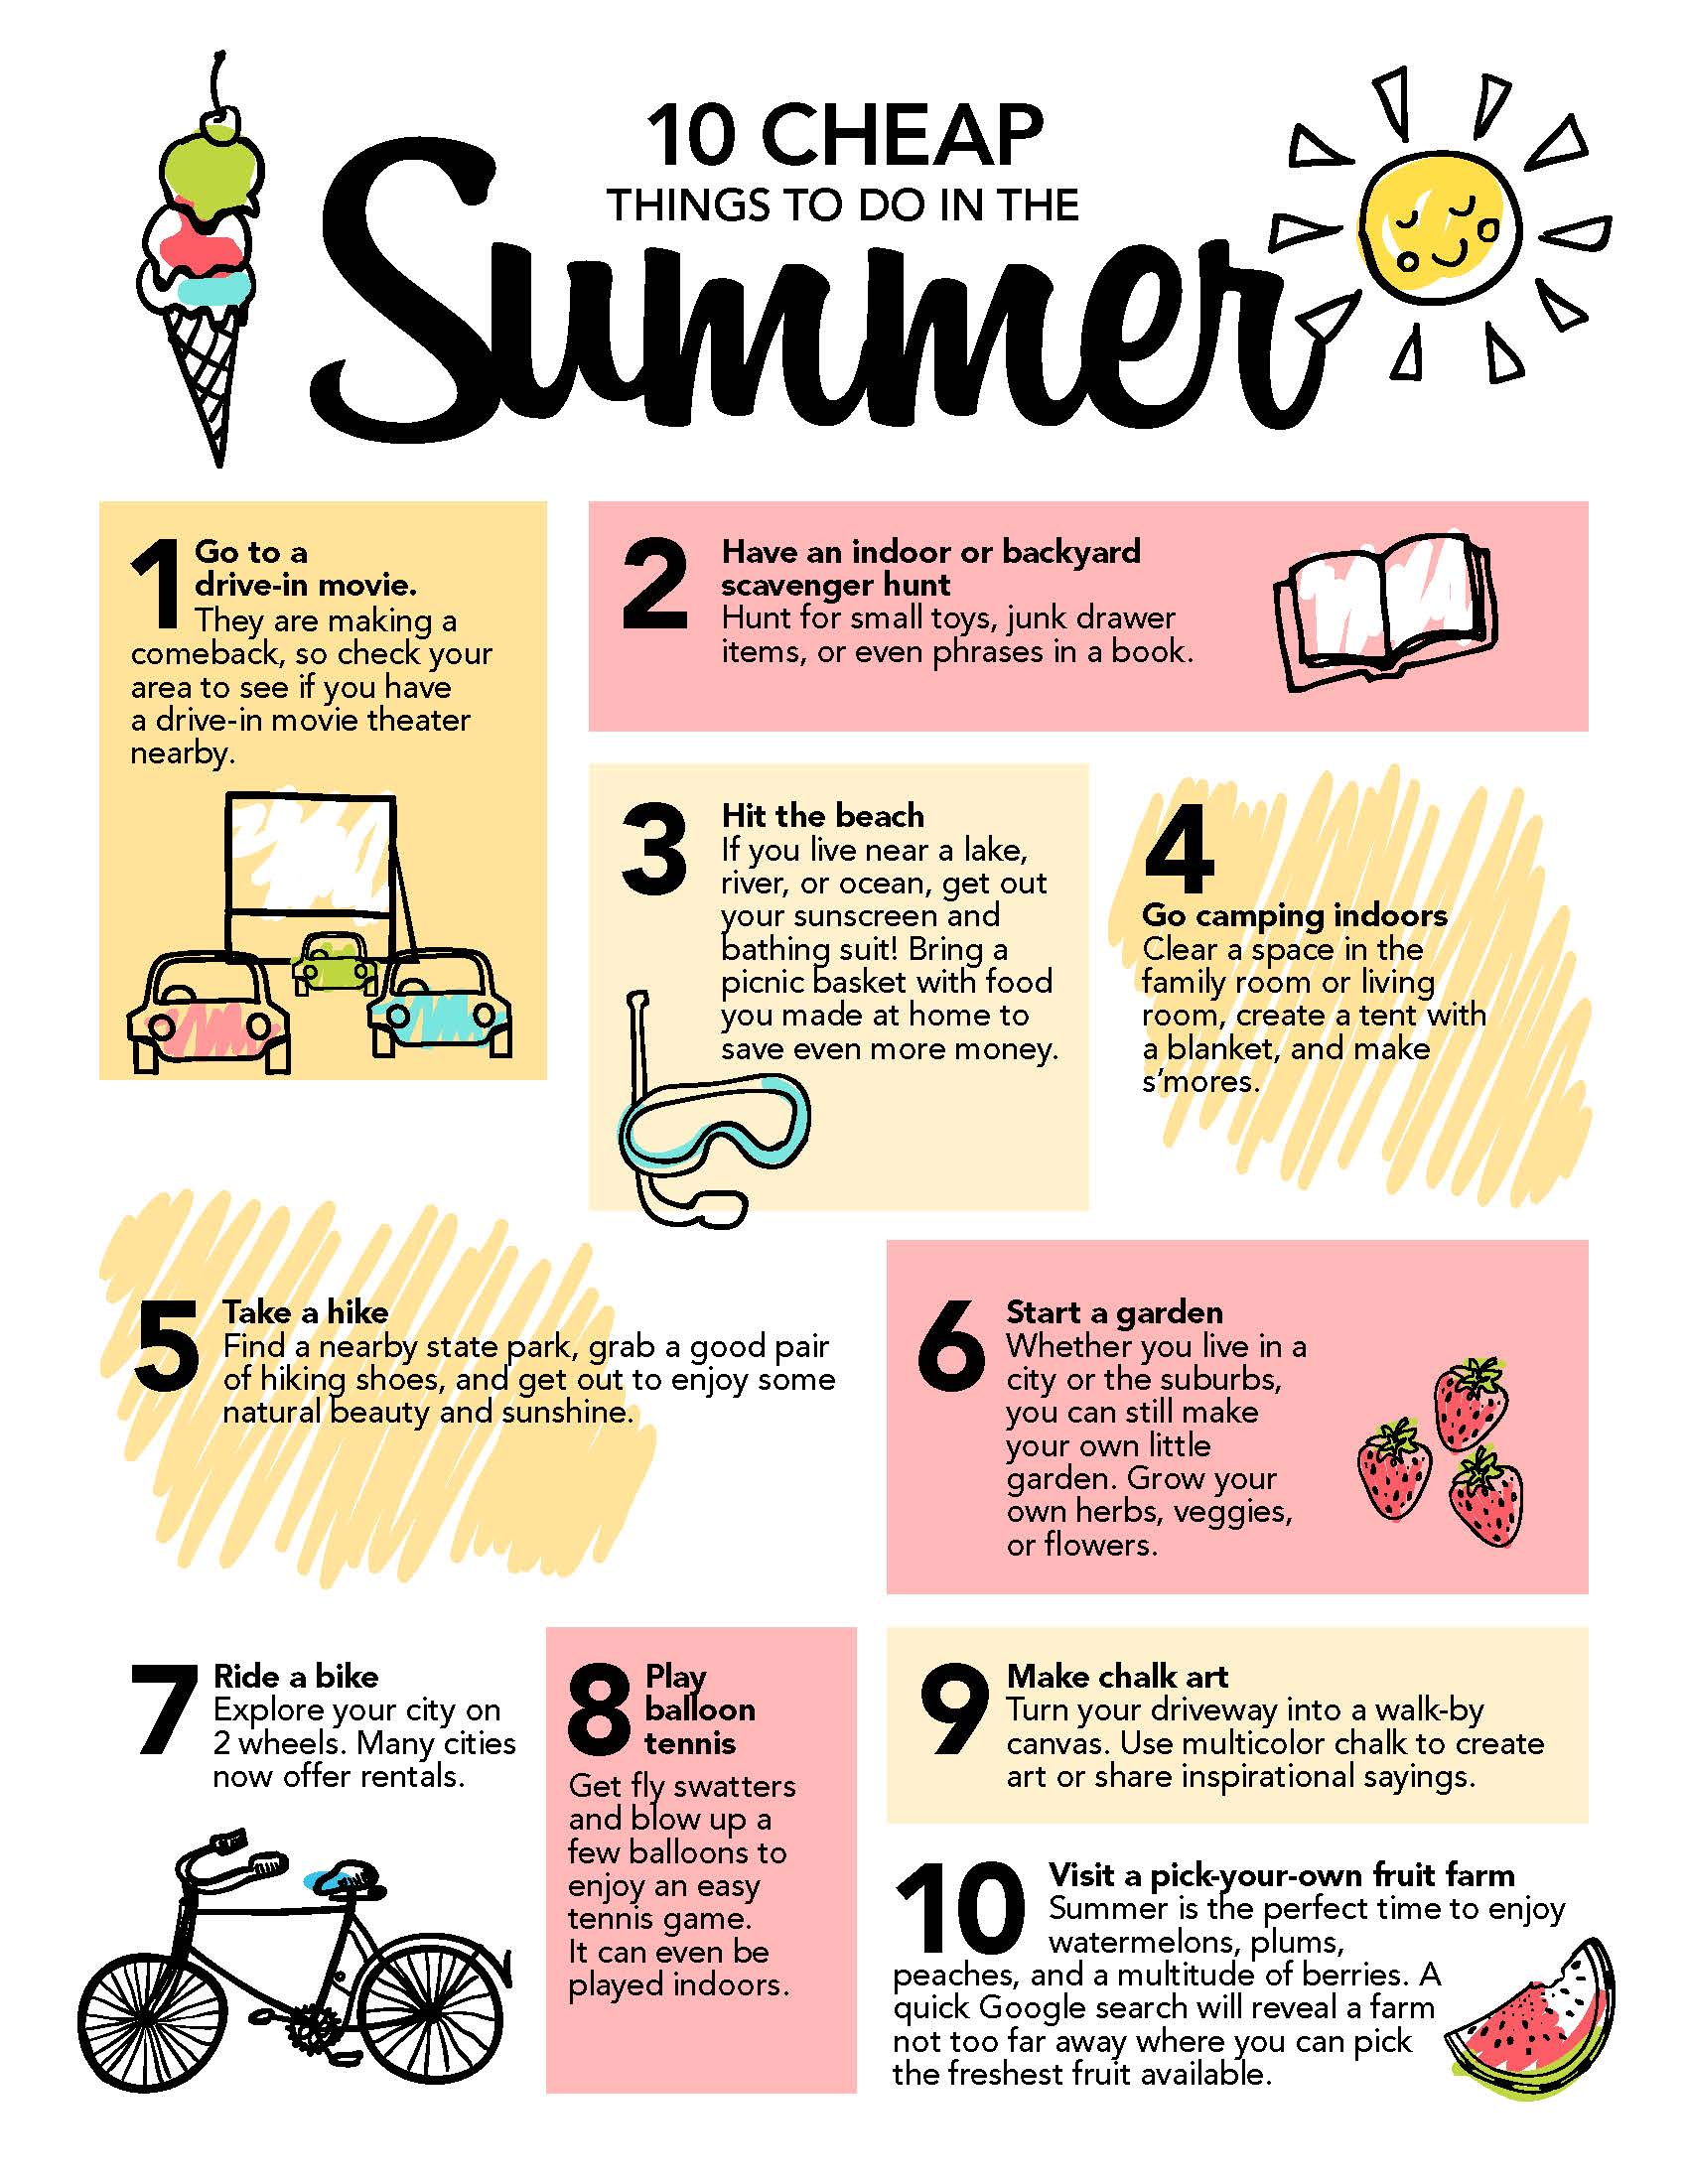 10 Cheap Things To Do This Summer - White Rose Credit Union